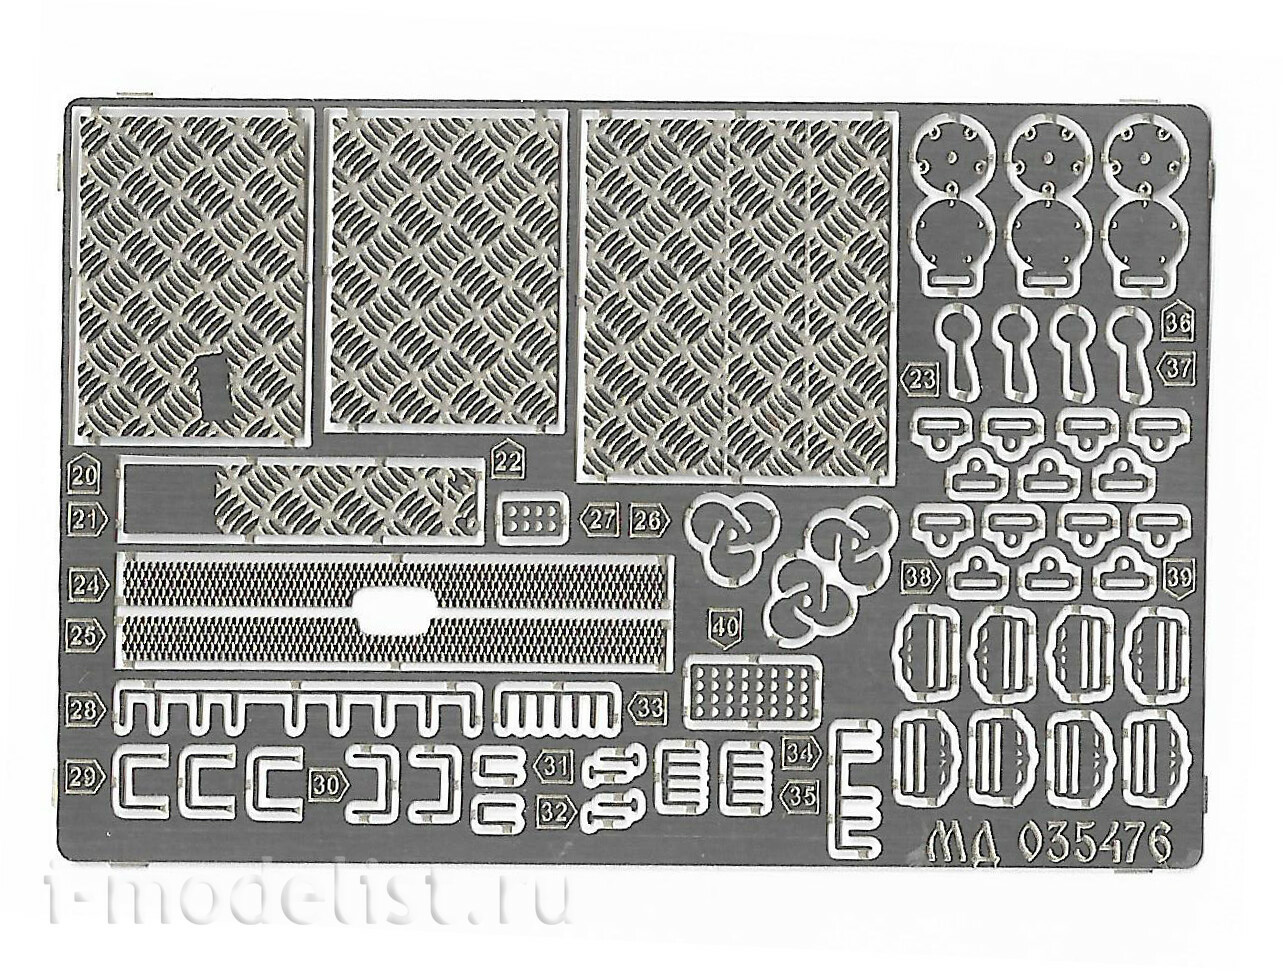 035476 Microdesign 1/35 Photo etching kit for the assembled model K-43509 